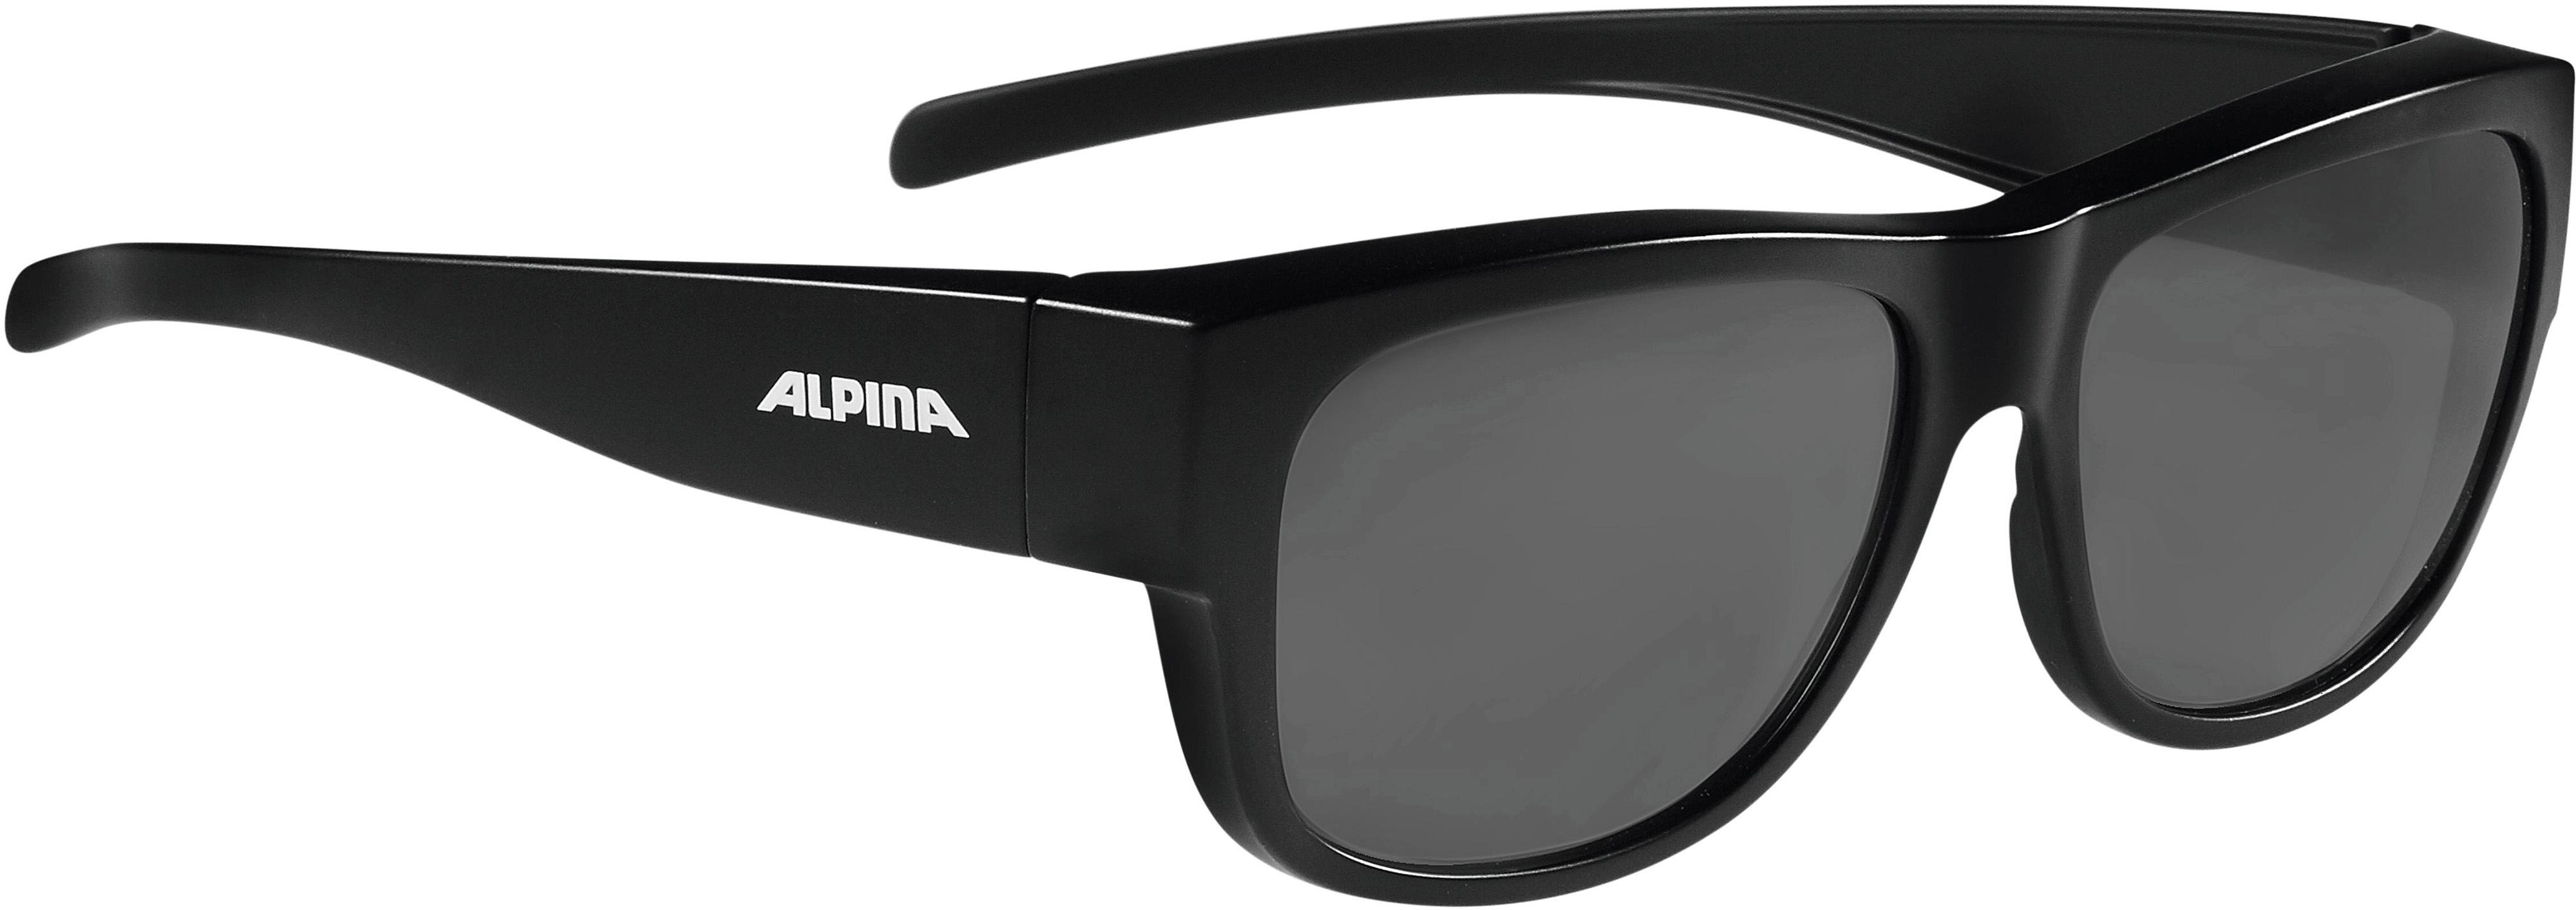 Image of ALPINA OVERVIEW II P Sonnenbrille